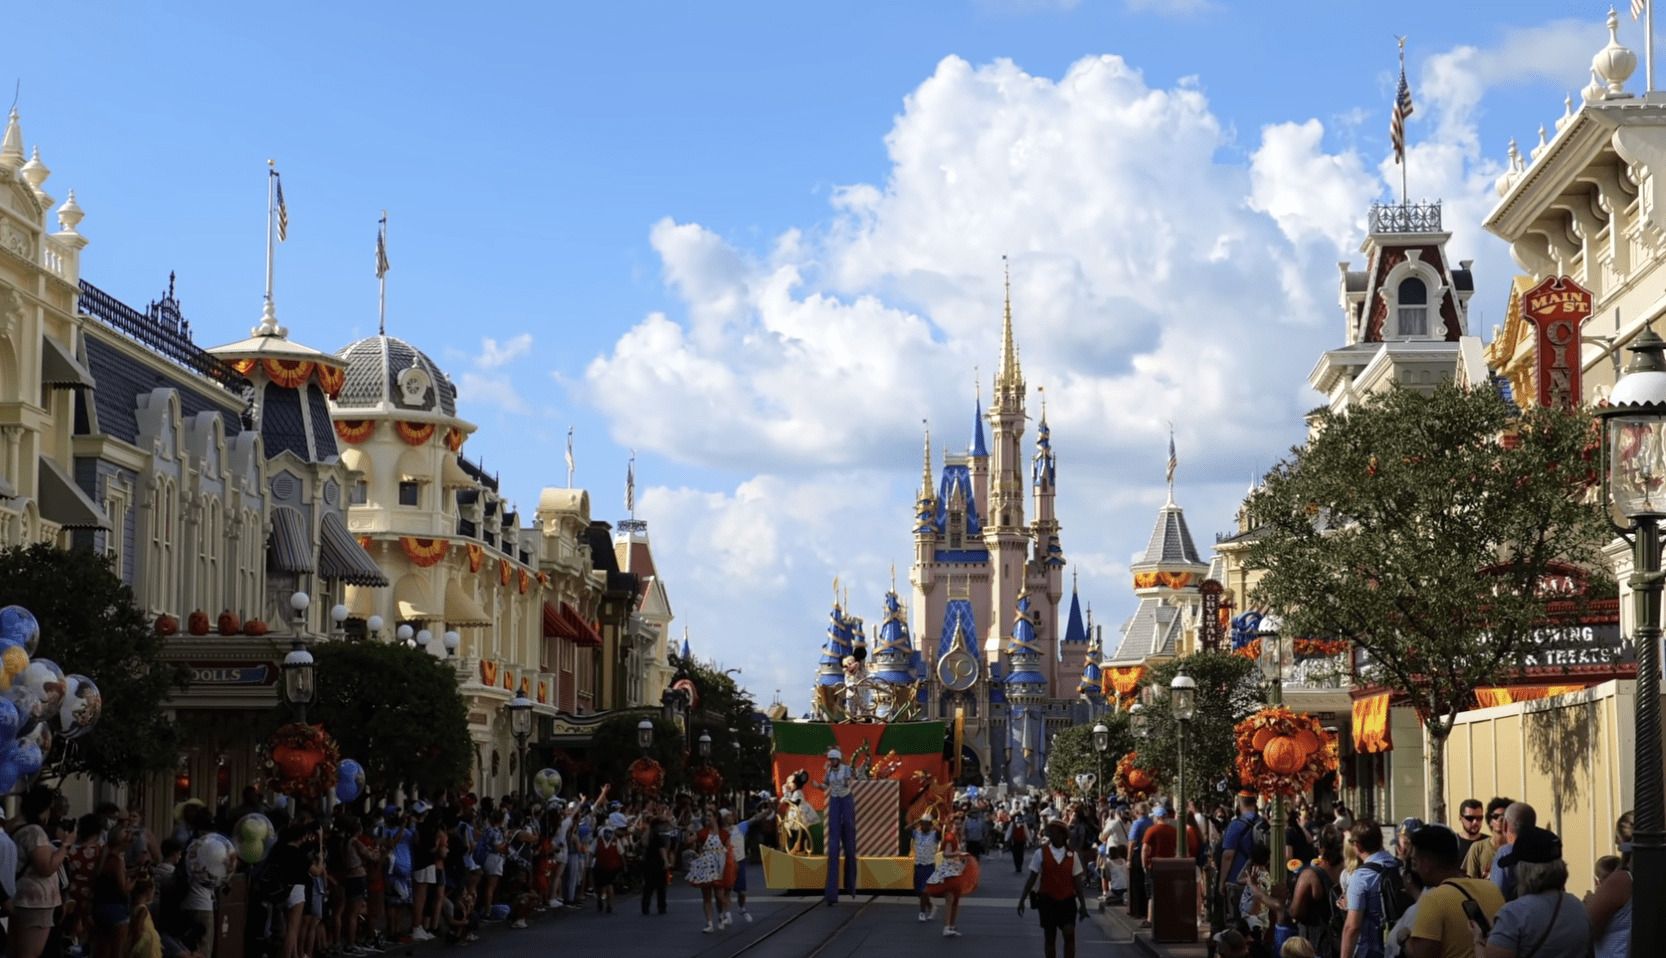 Latest Disaster Indicates More Trouble For Disney | WLT Report